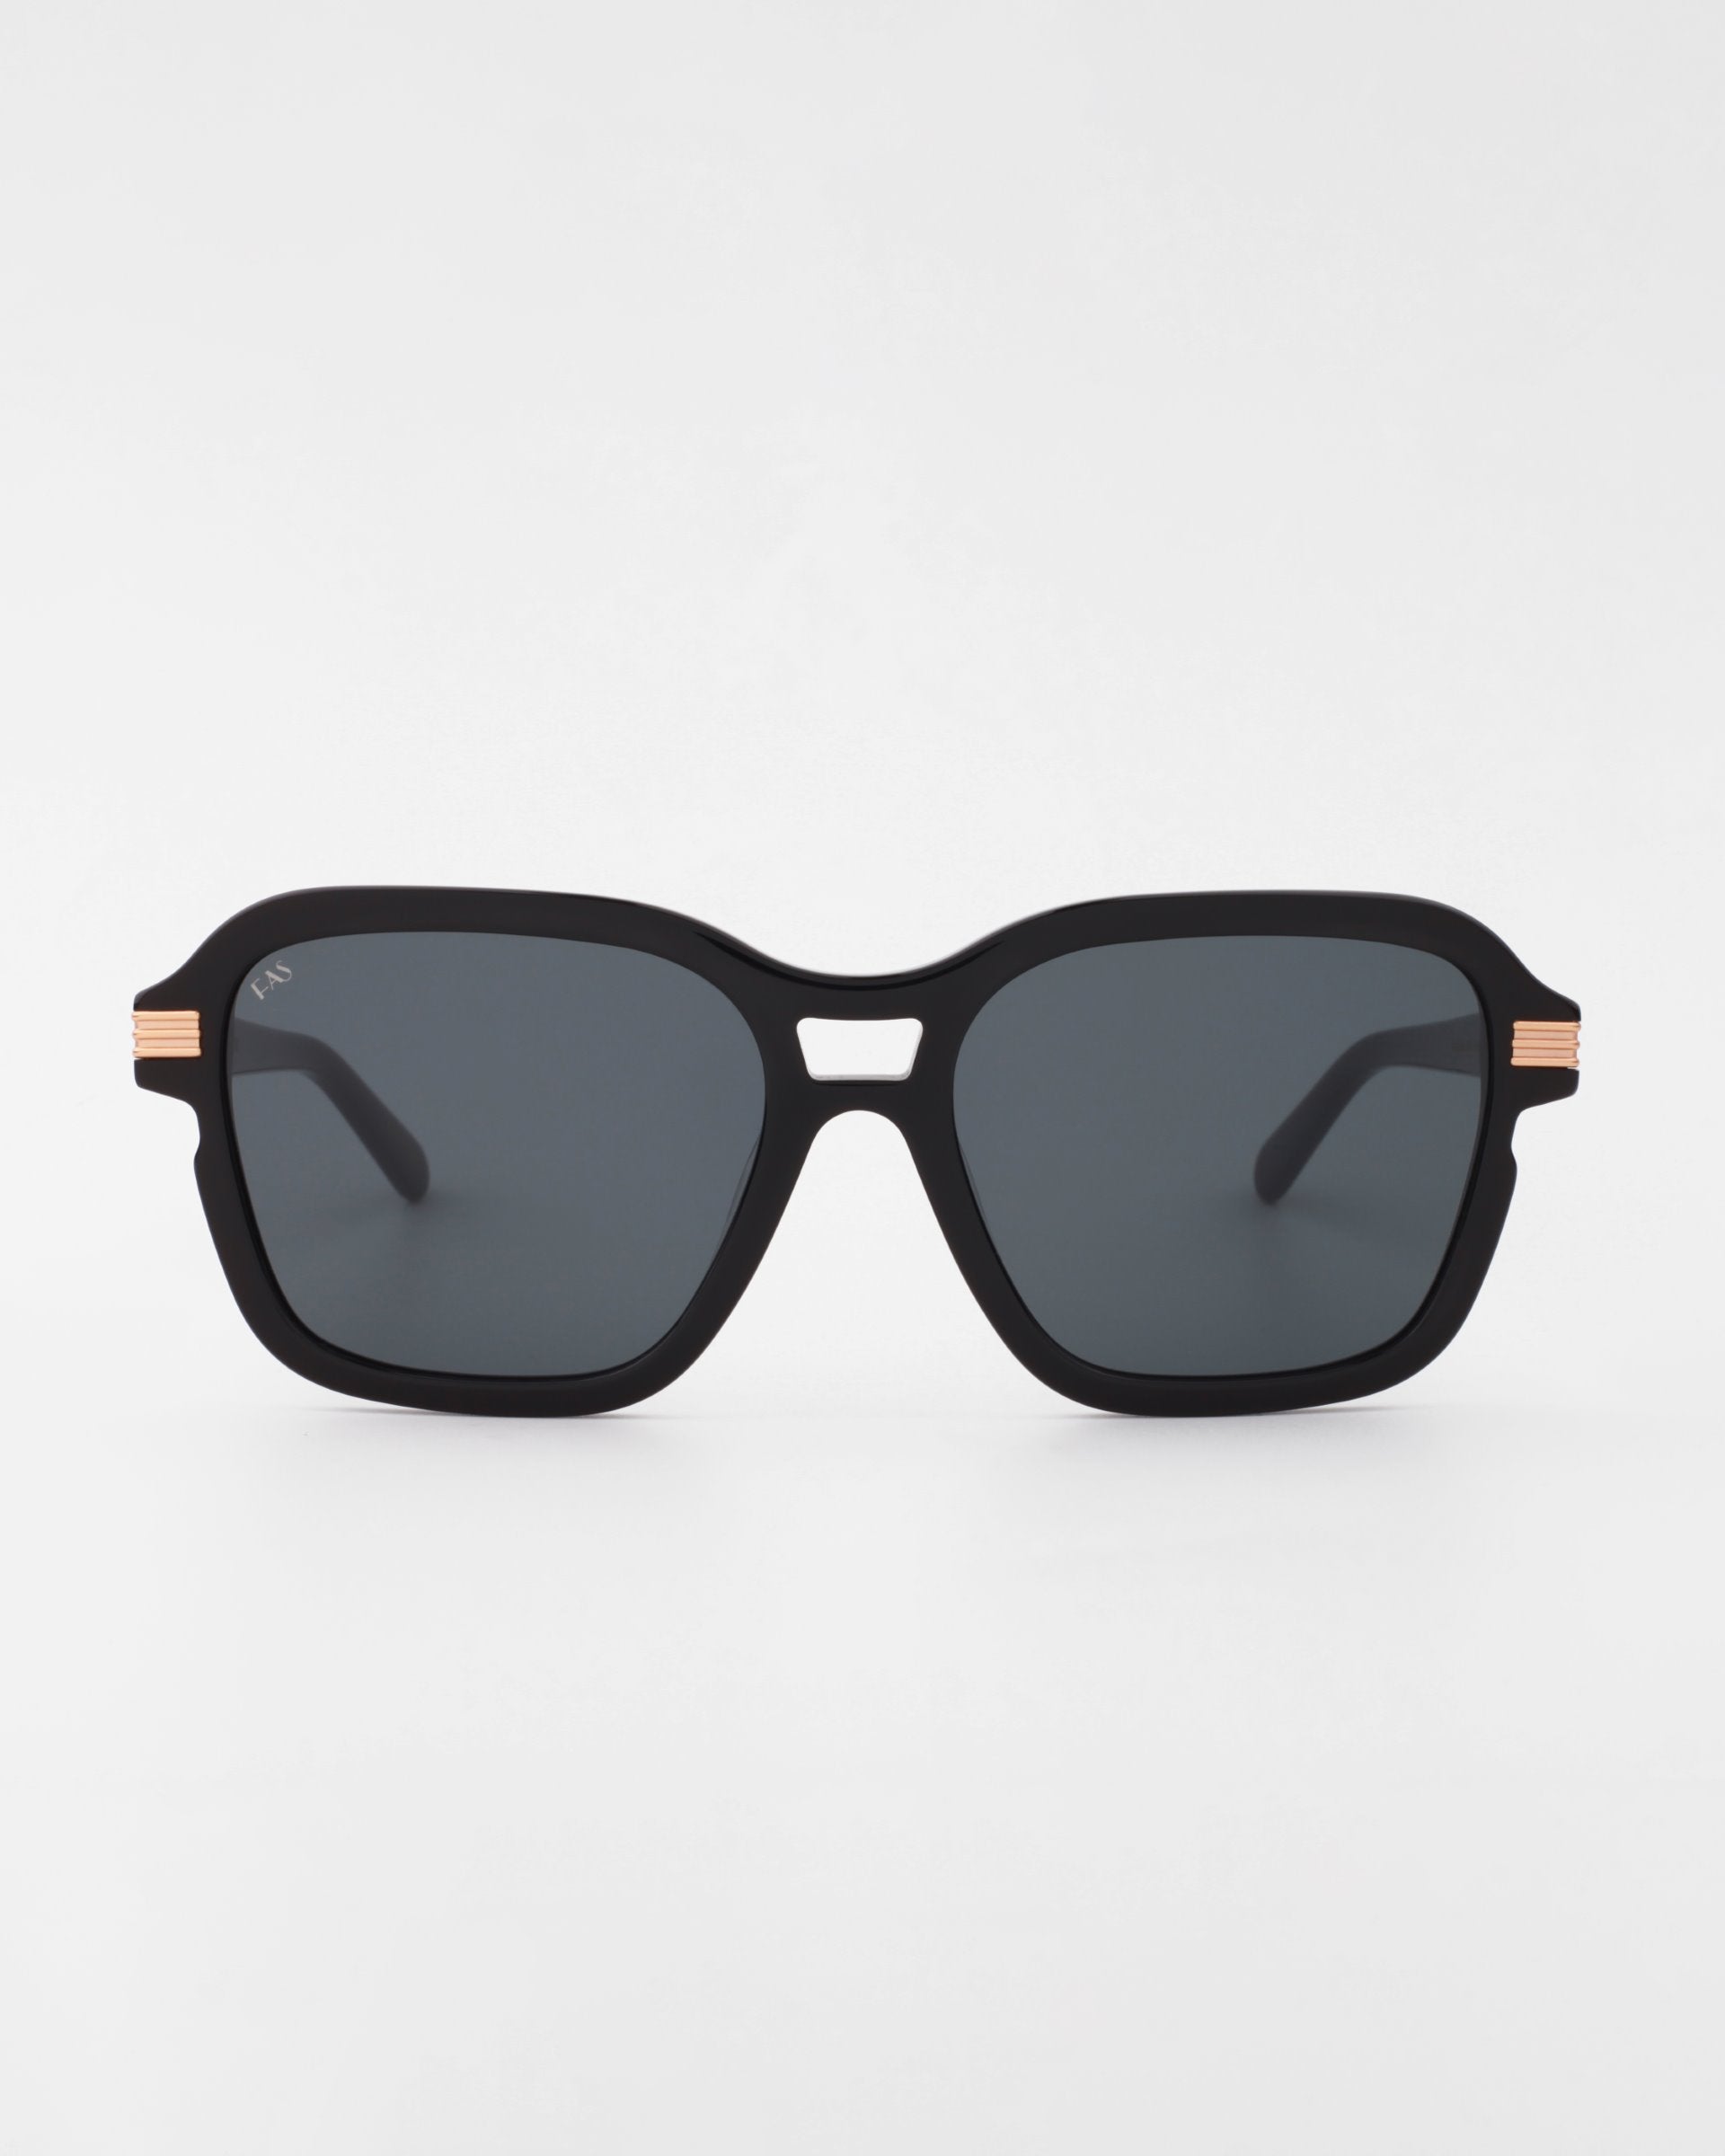 A pair of stylish black square-frame Shadyside sunglasses by For Art's Sake® with shatter-resistant nylon lenses. The hand-polished acetate temples are decorated with thin horizontal metallic accents near the hinge area. The background is plain white.